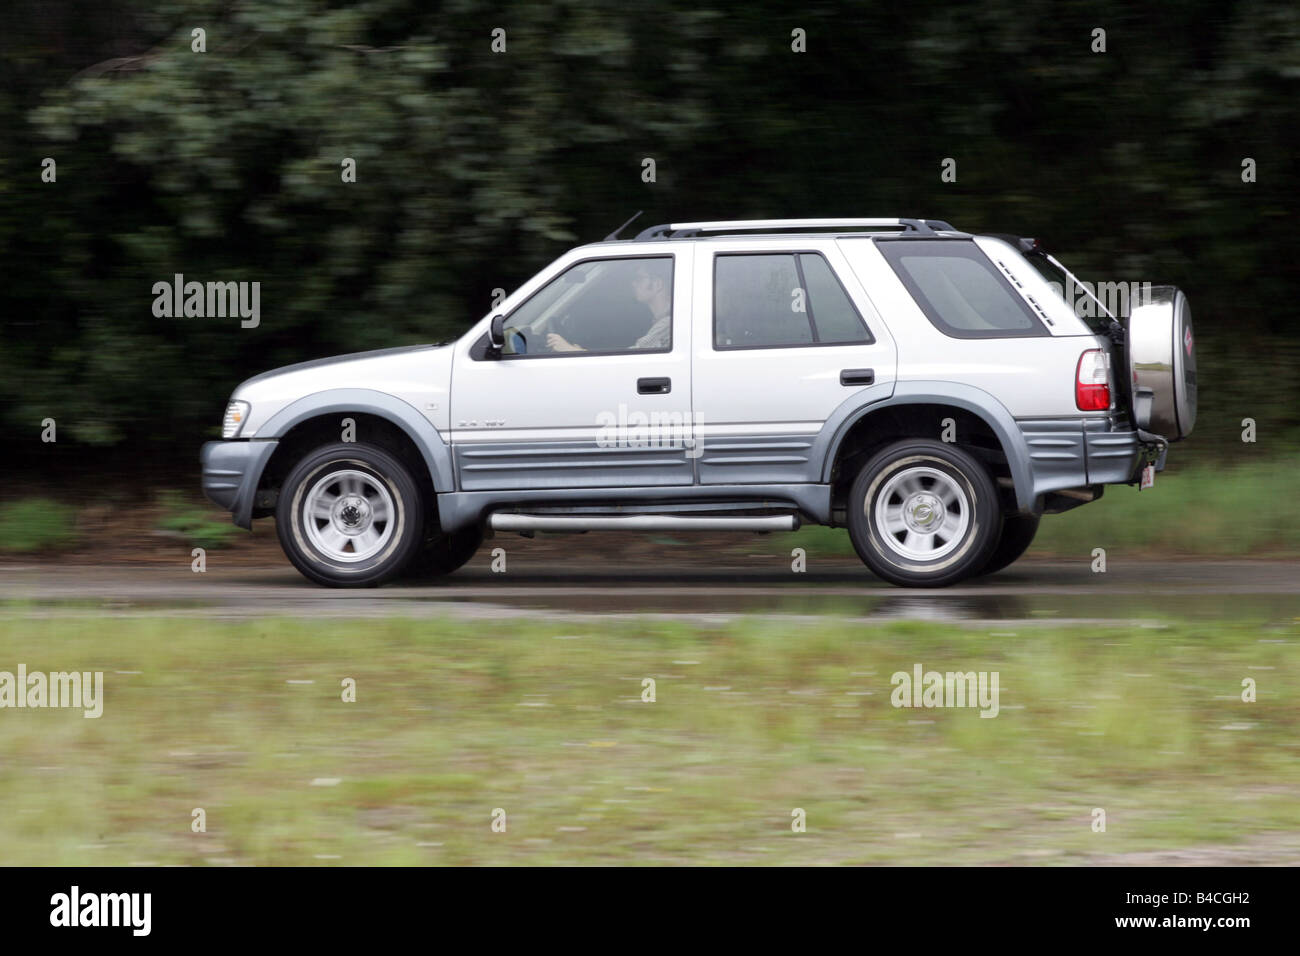 Car, Land breeze, cross country vehicle, model year 2005-, silver, driving, side view, country road Stock Photo